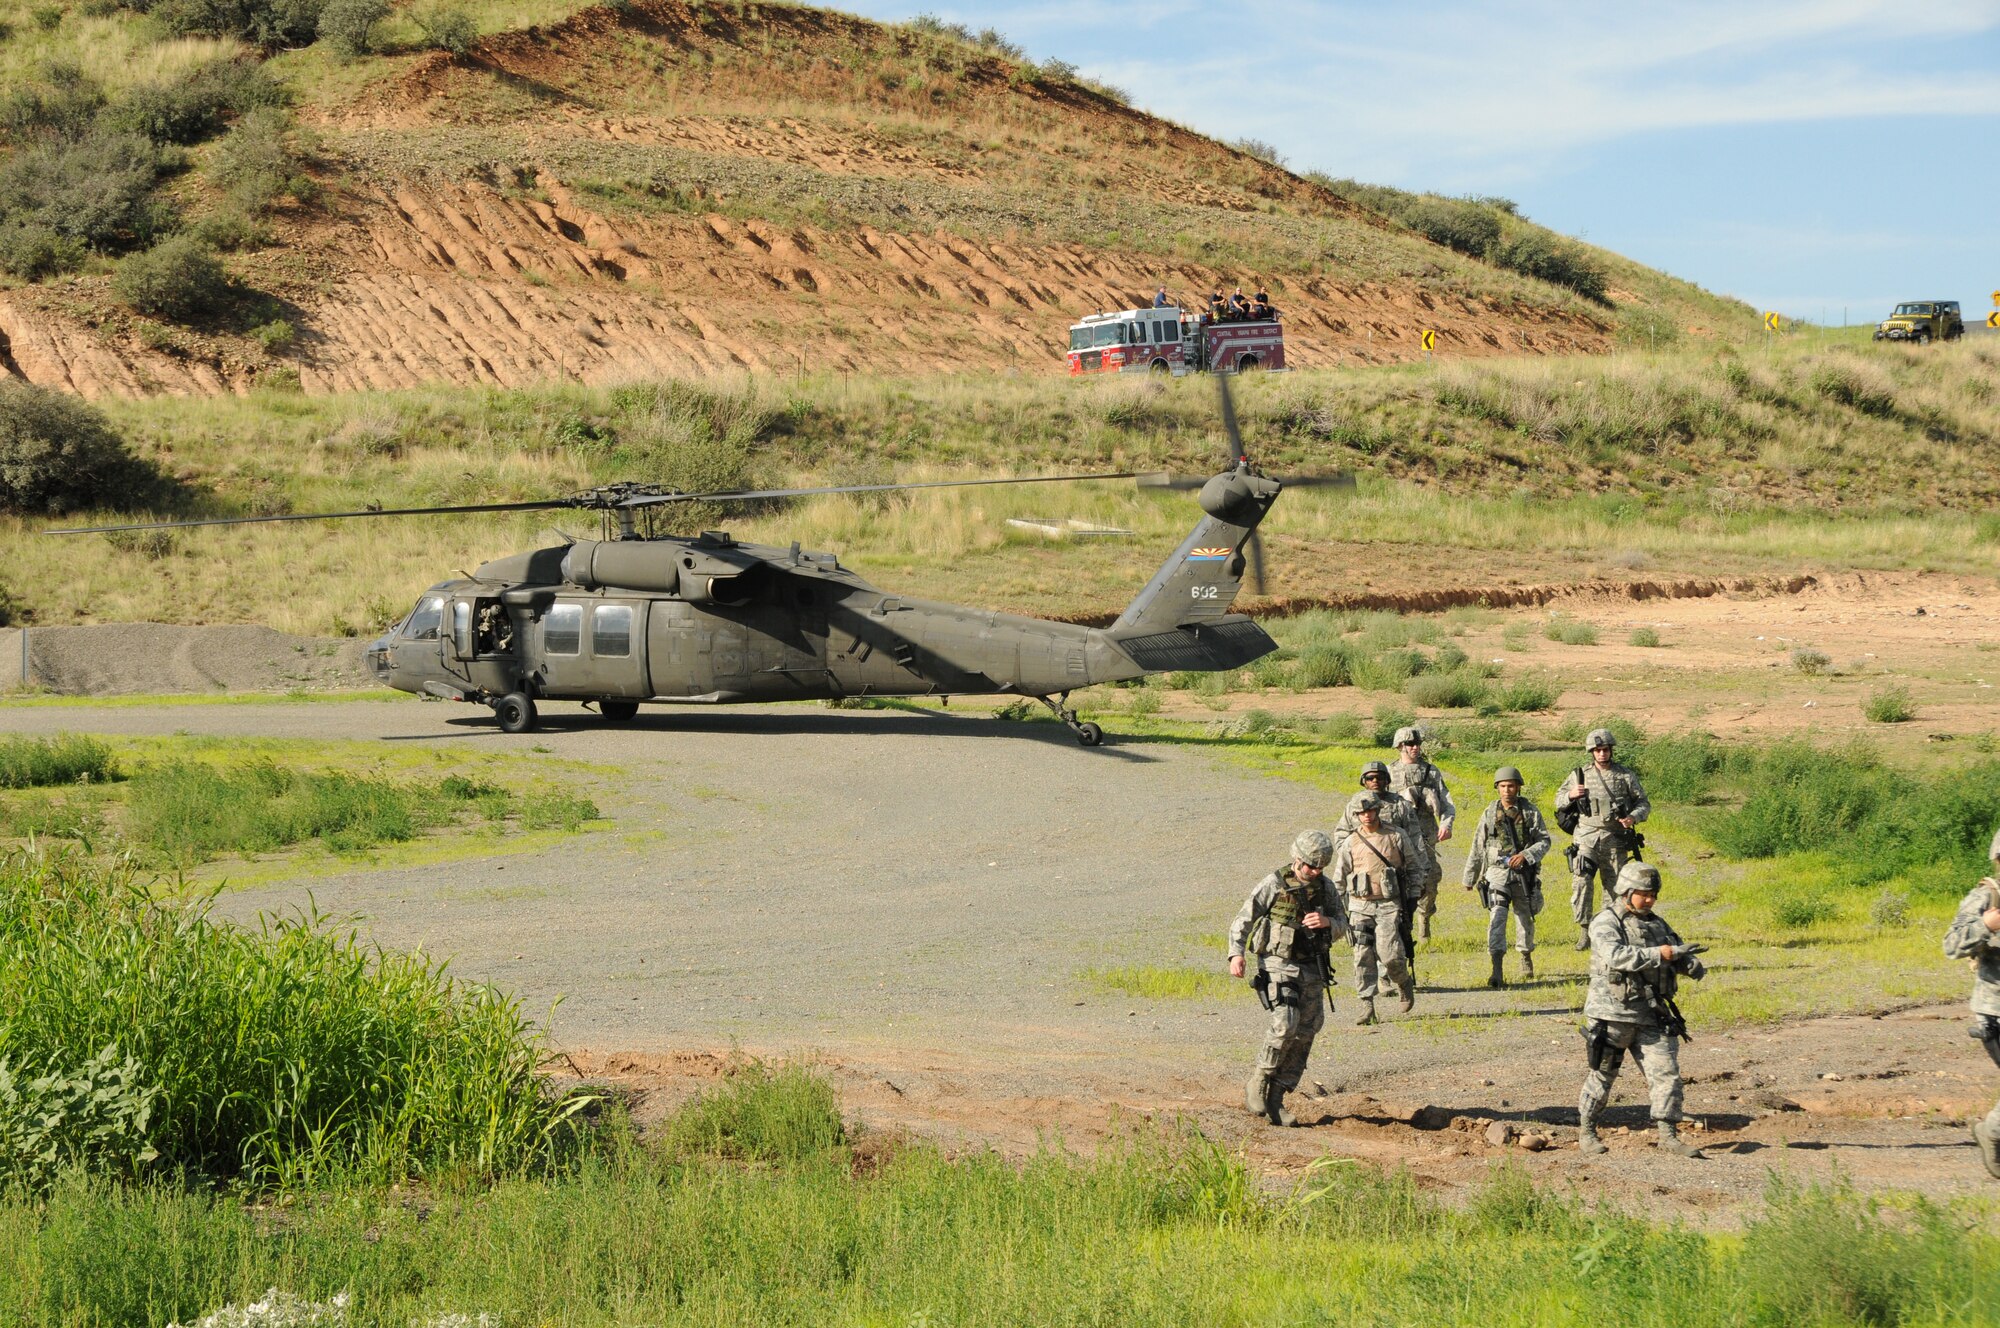 U.S. Airmen with the 161st Security Forces Squadron, Arizona Air National Guard, are dropped off at the Prescott Valley SWAT training grounds, Prescott Valley, Ariz., Aug. 3, 2013. The Airmen are preparing for an upcoming deployment with training focused on weapons firing, building entry and self-aid buddy care. (U.S. Air National Guard photo by Tech. Sgt. Susan Gladstein/Released)